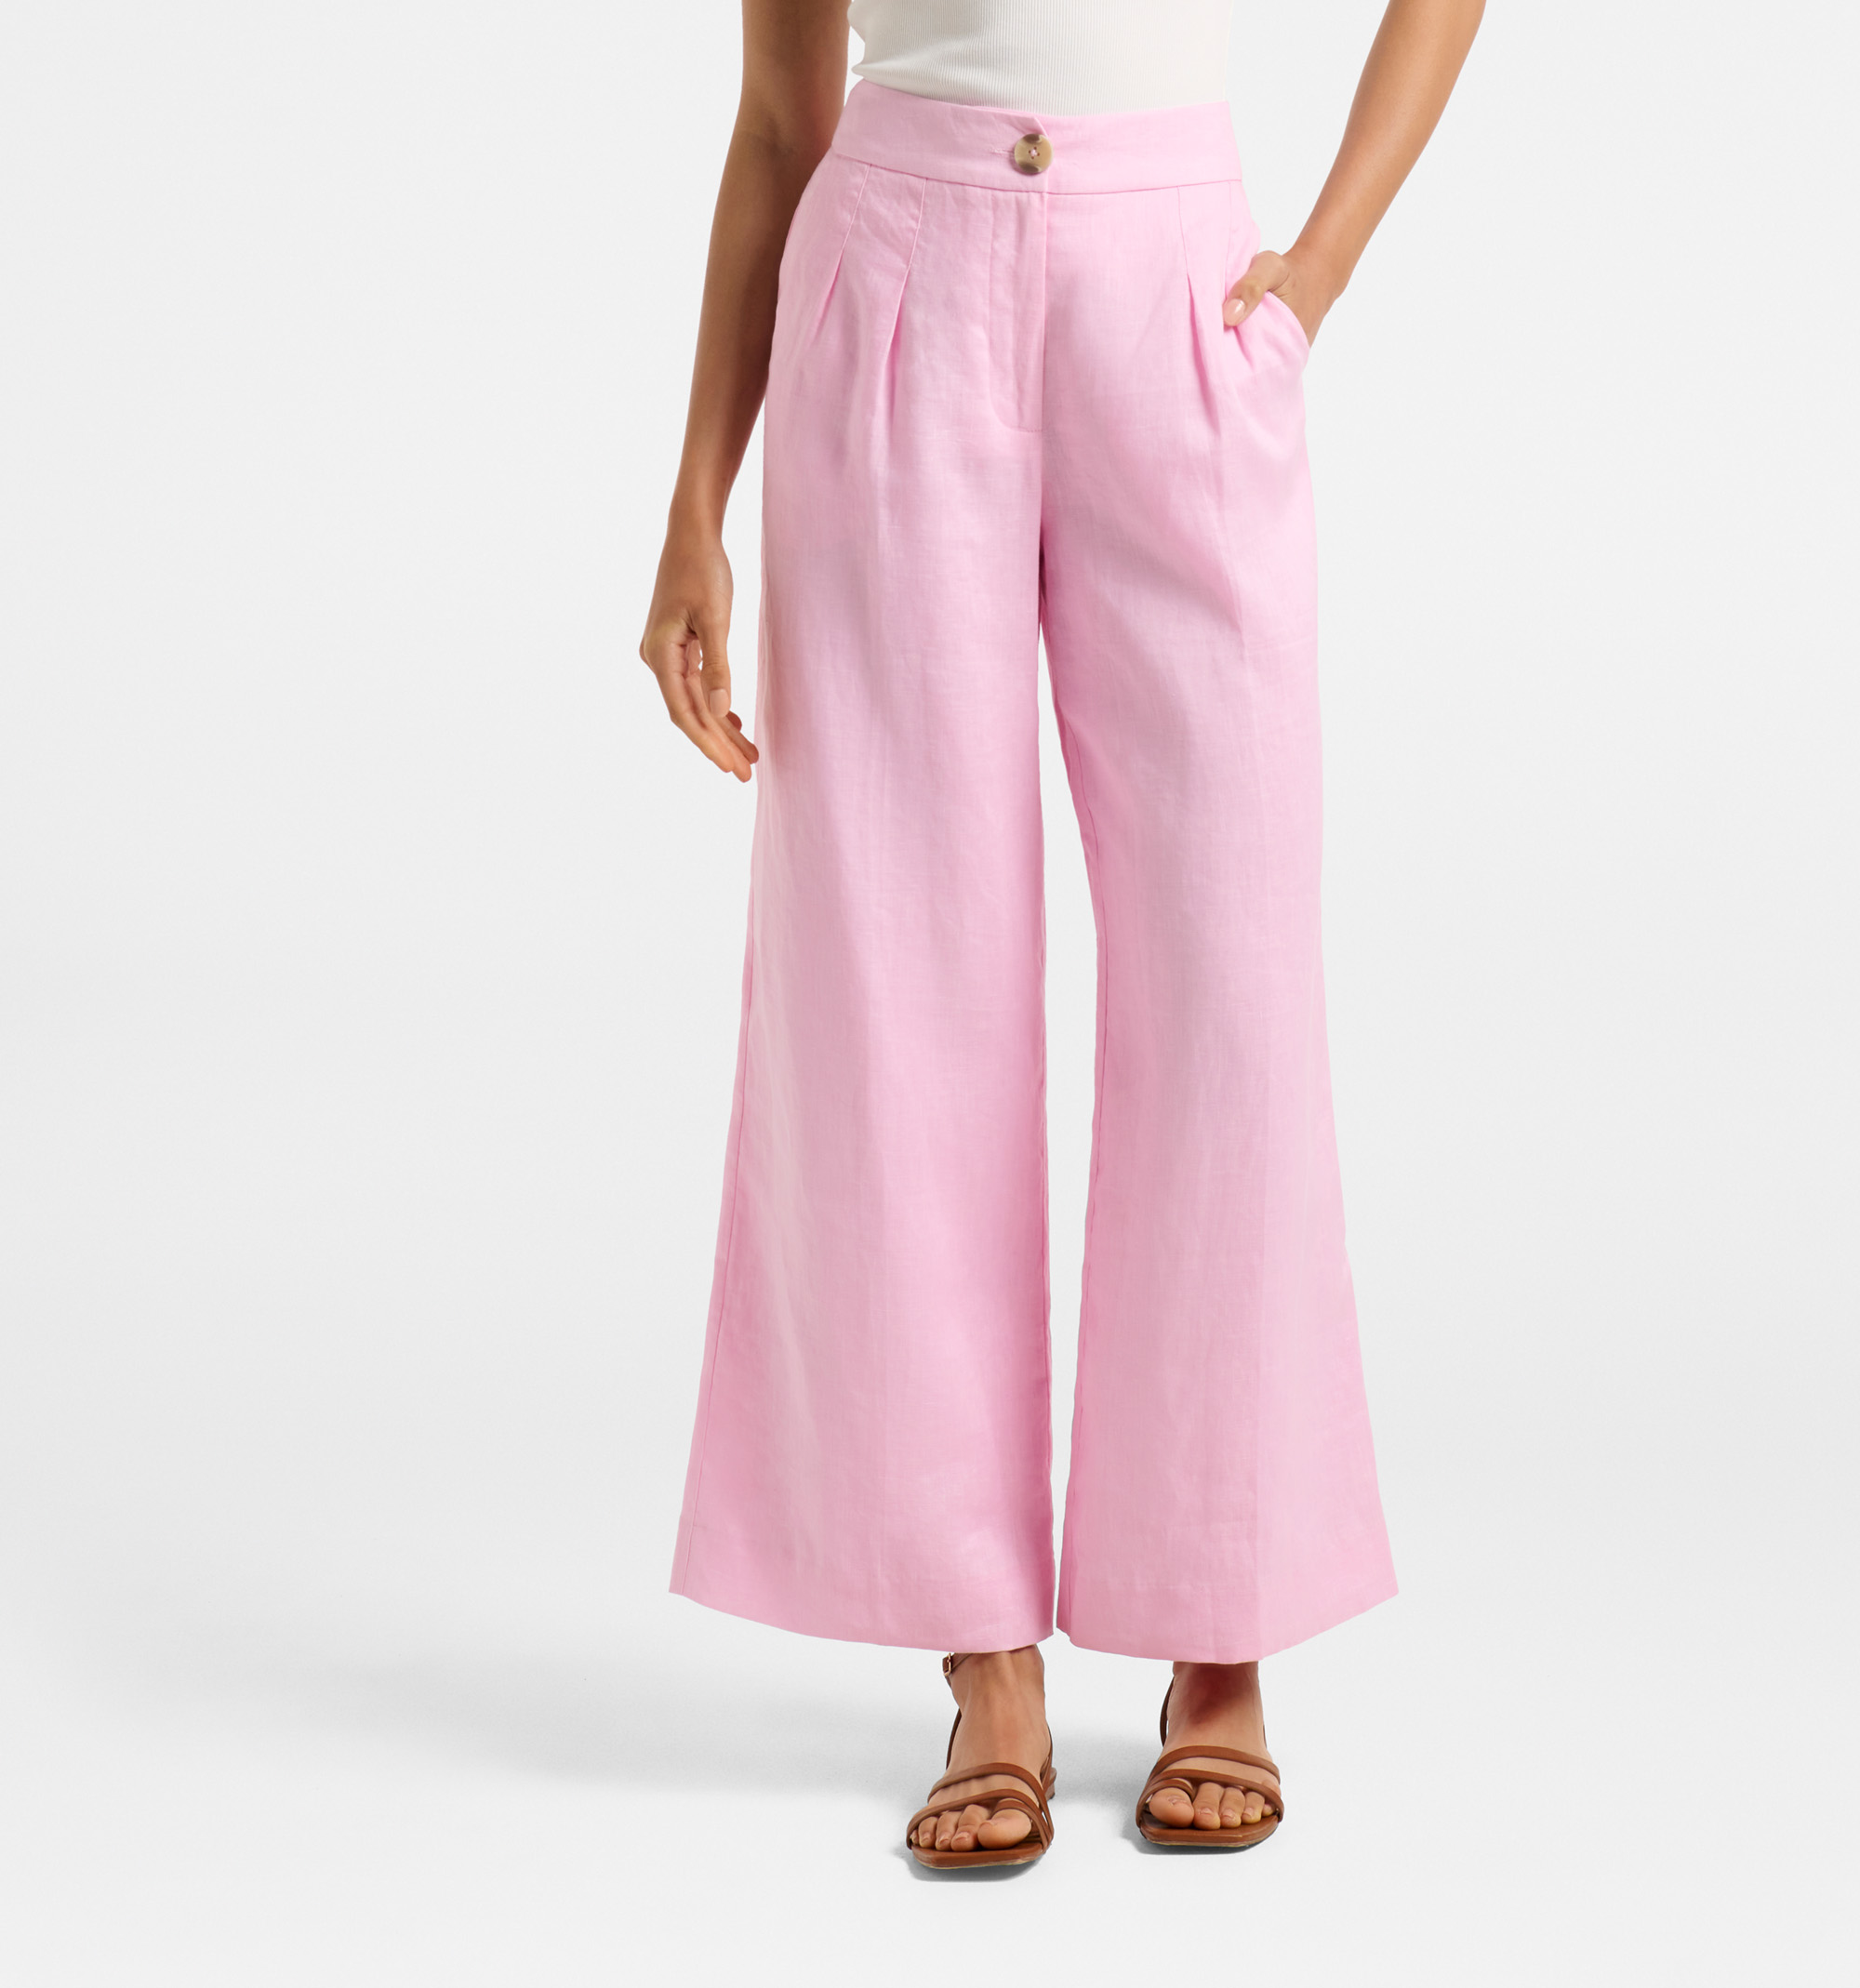 Shop WideLeg Linen Pants for Women from latest collection at Forever 21   403817